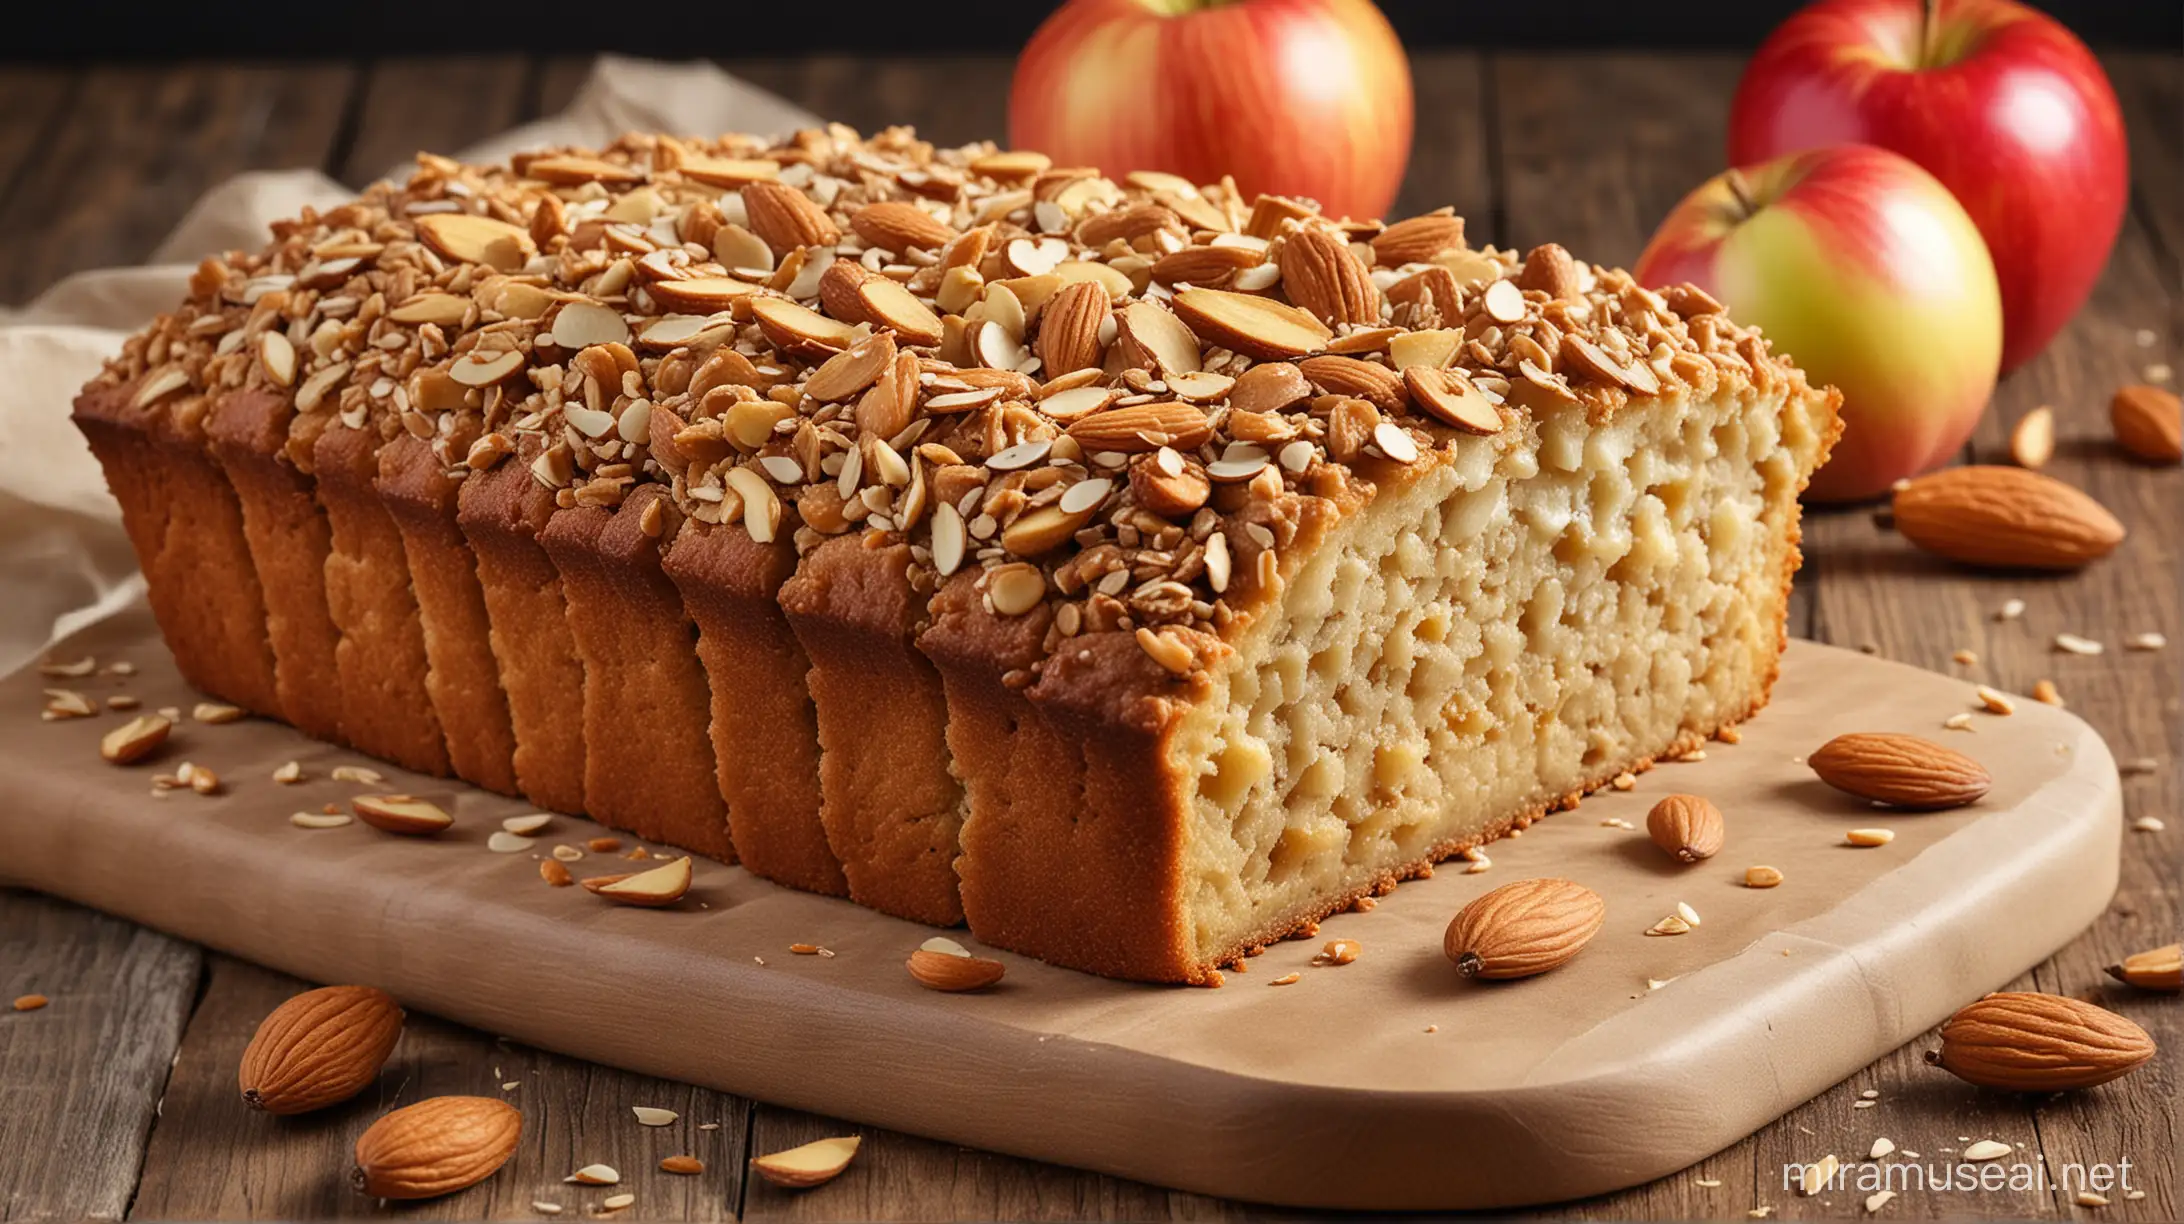 Homemade Almond Crusted Apple Bread Recipe in High Definition